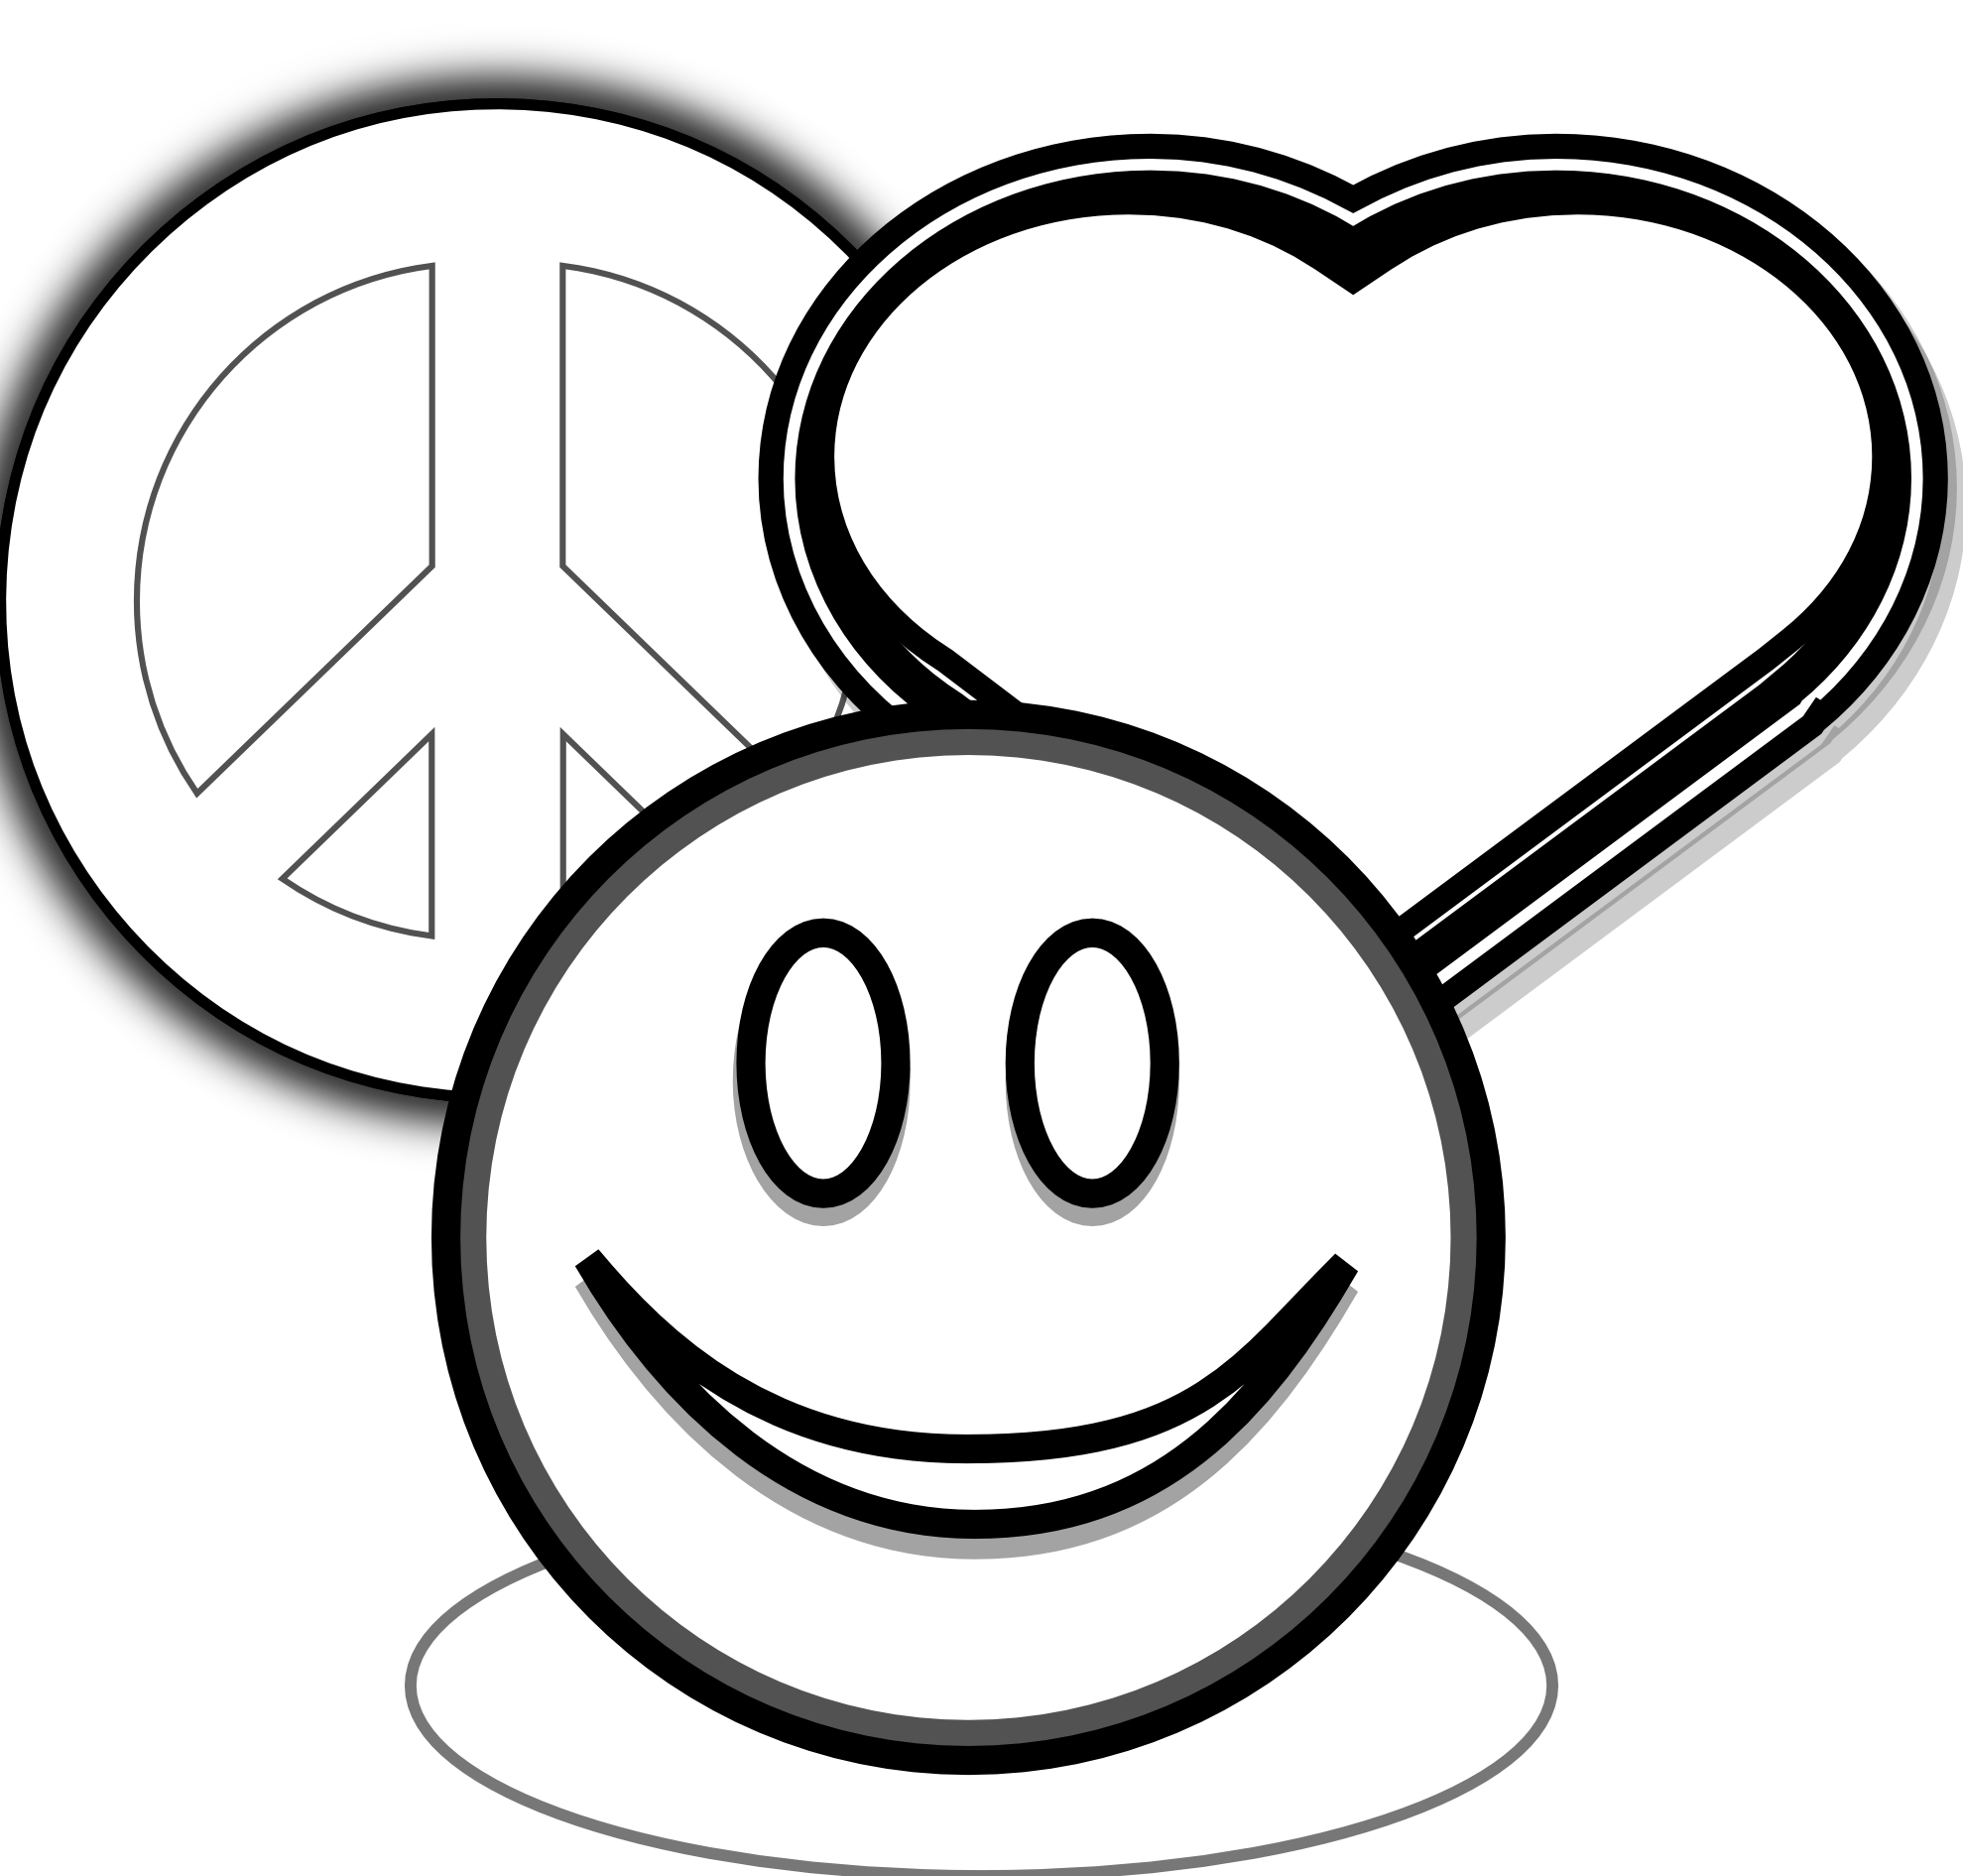 Clip Art: peace love and happyness black white ... - ClipArt Best ...